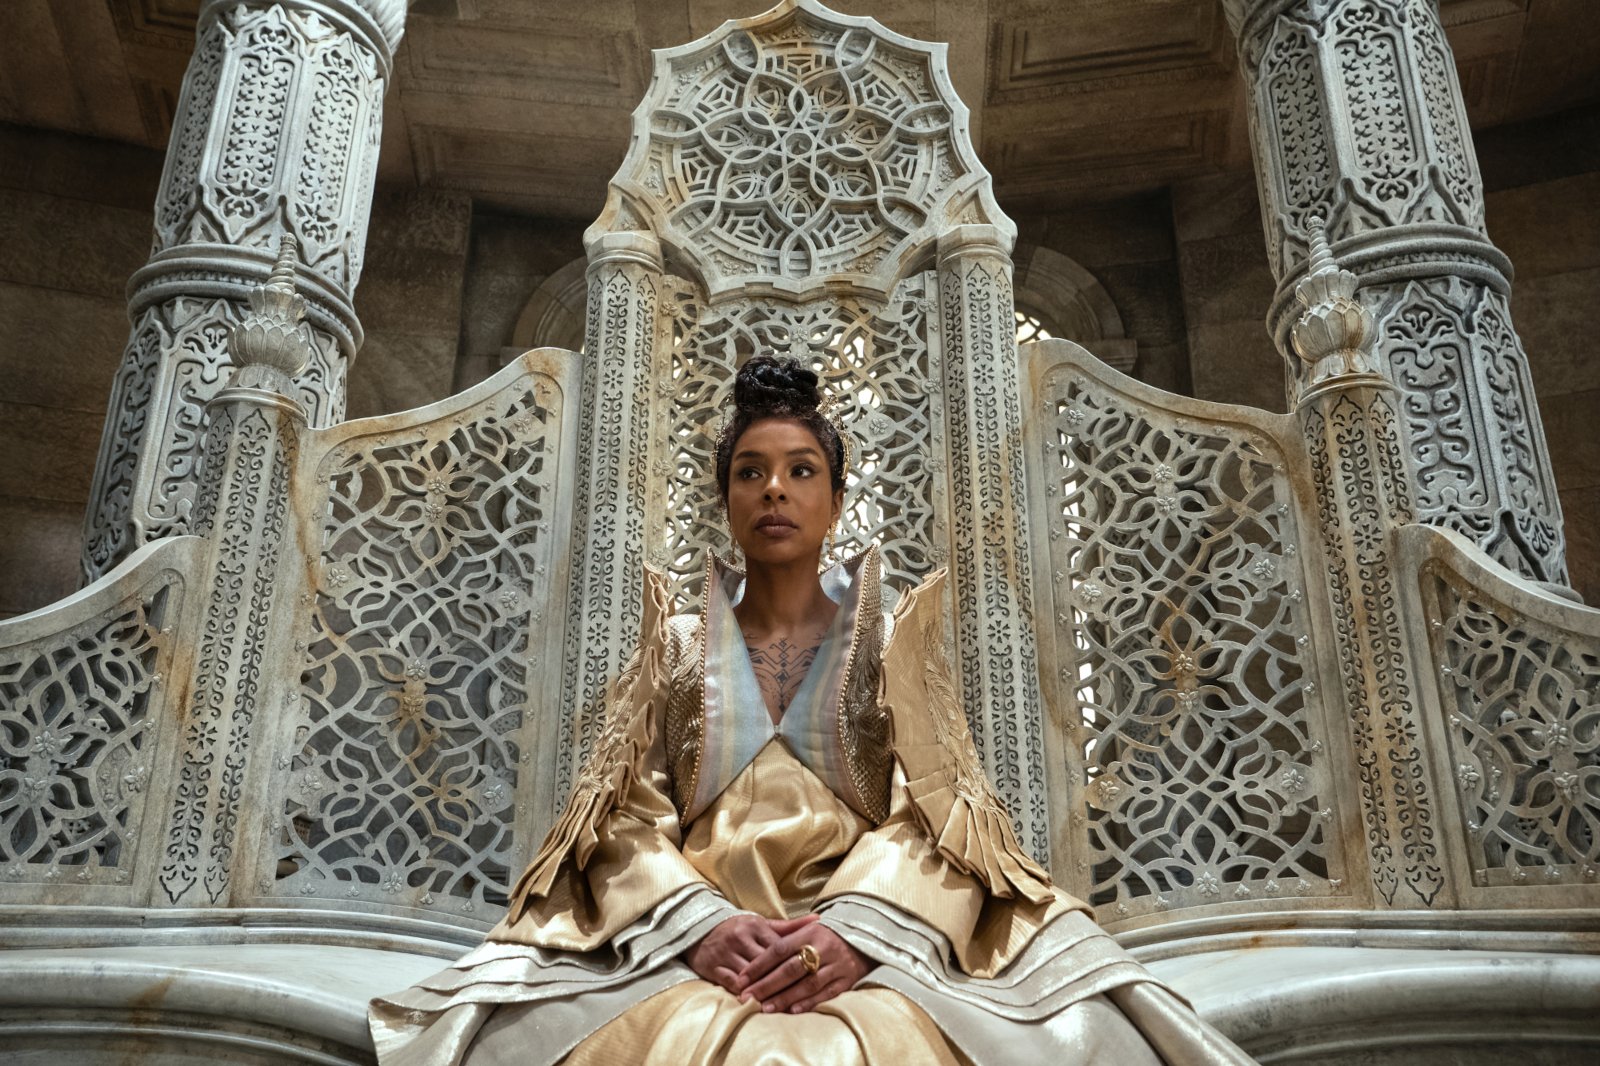 Sophie Okonedo as Siuan in 'The Wheel of Time' Episode 6. She's wearing a gold and white dress.